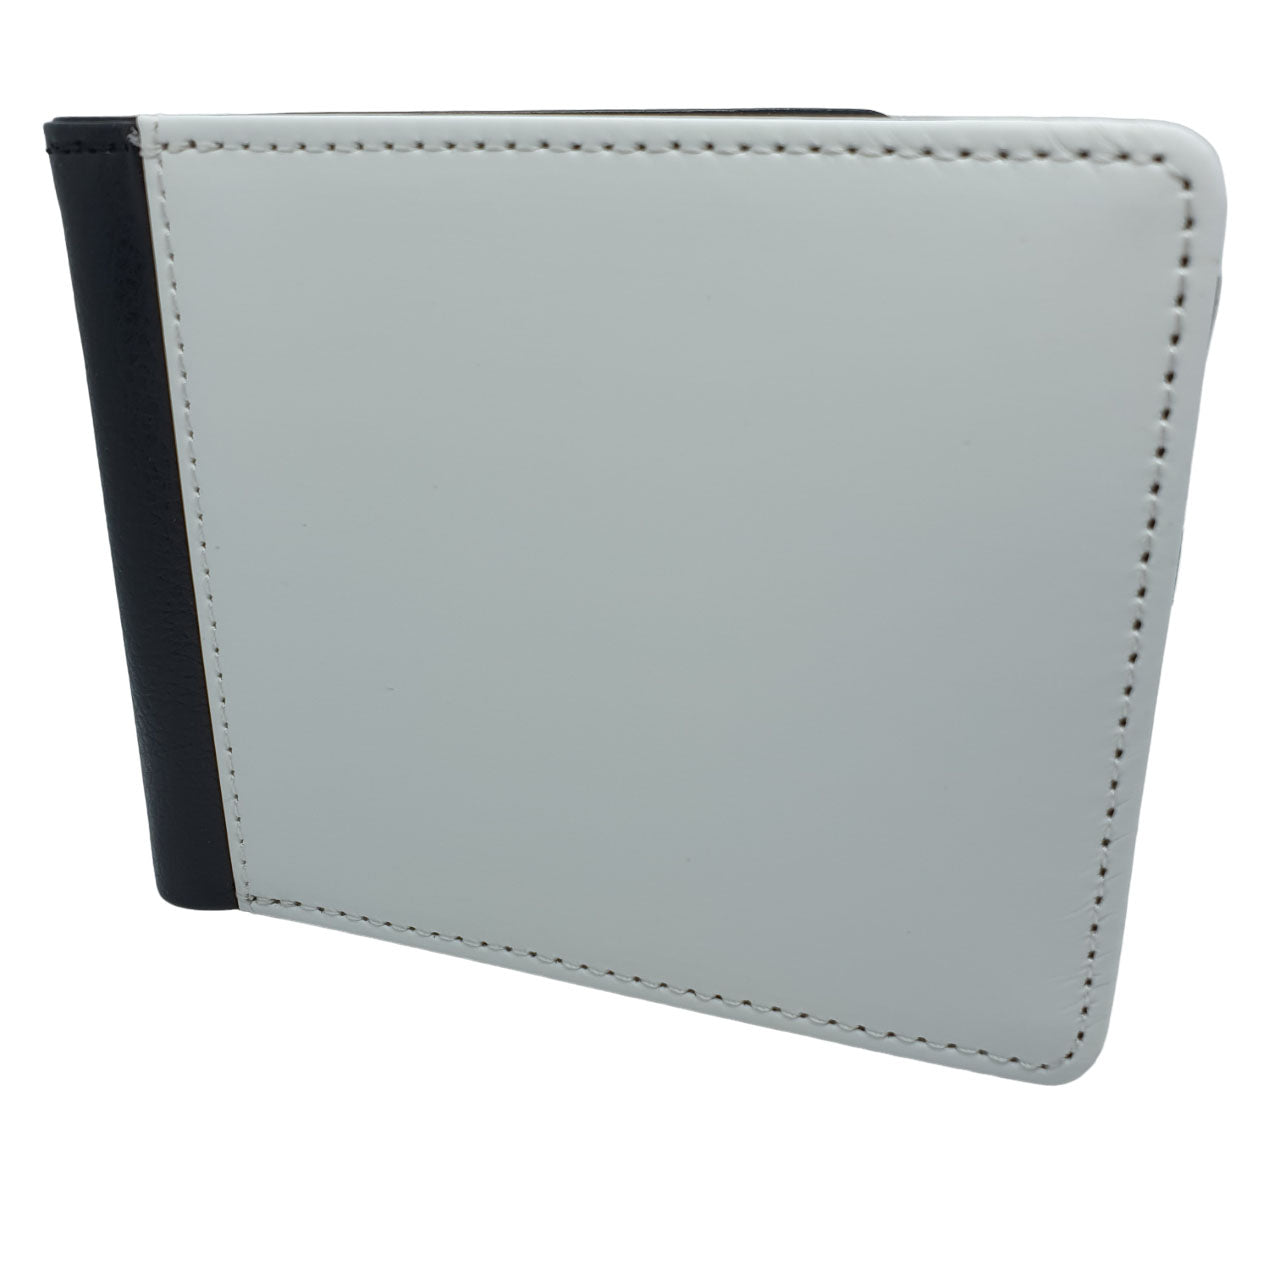 front of open pu leather wallet with white blank front and concise stitching